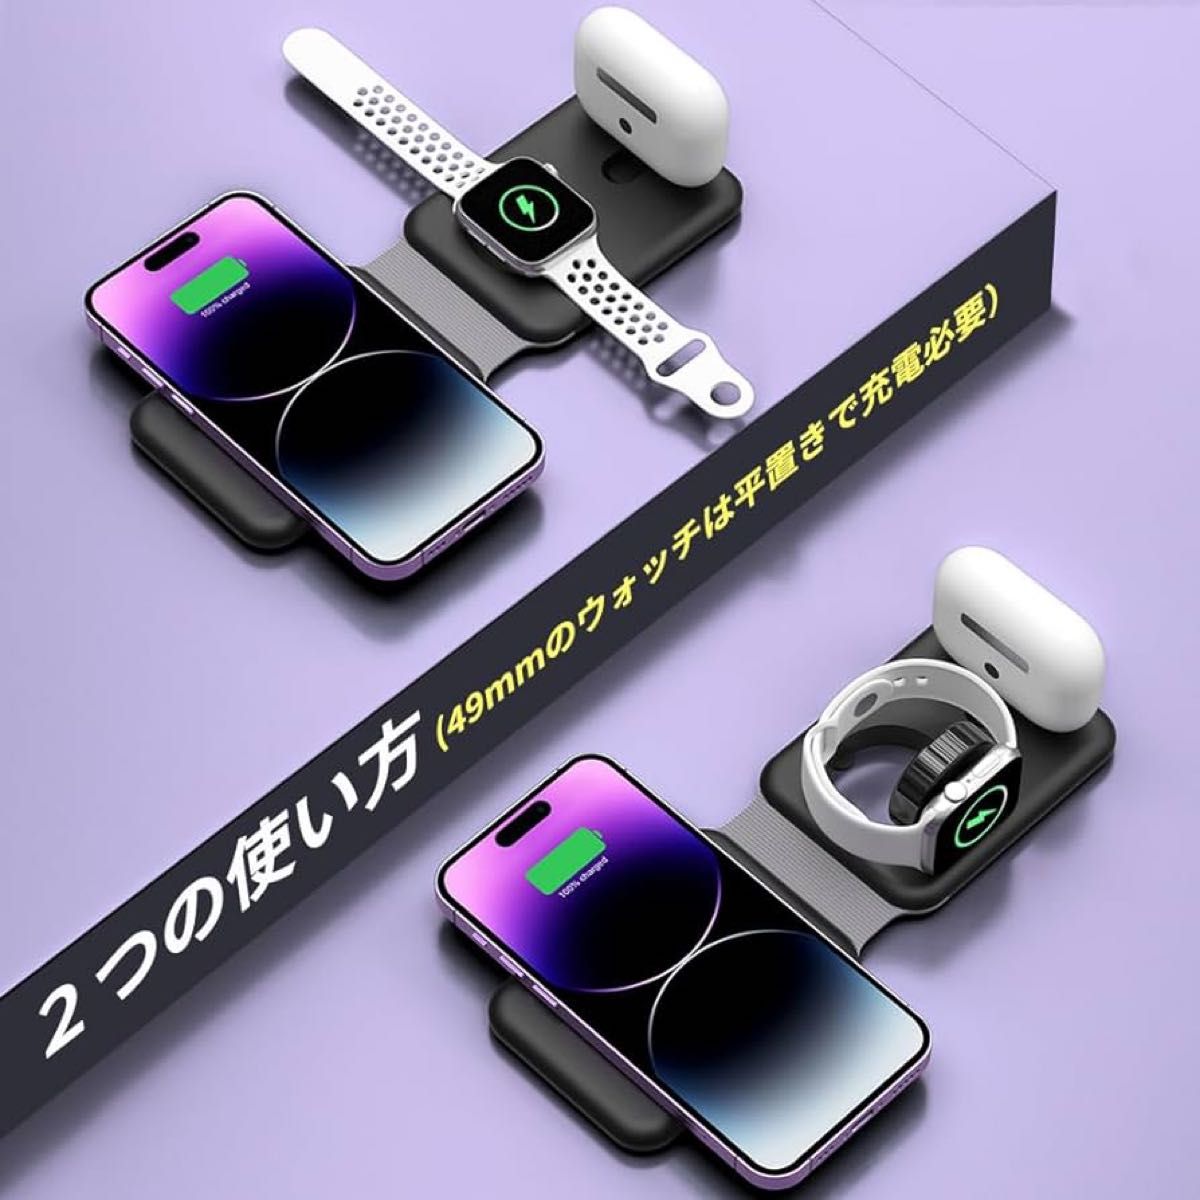 3in1 ワイヤレス充電器 折りたたみ magsafe充電器対応 充電器 iPhone Apple ワイヤレス